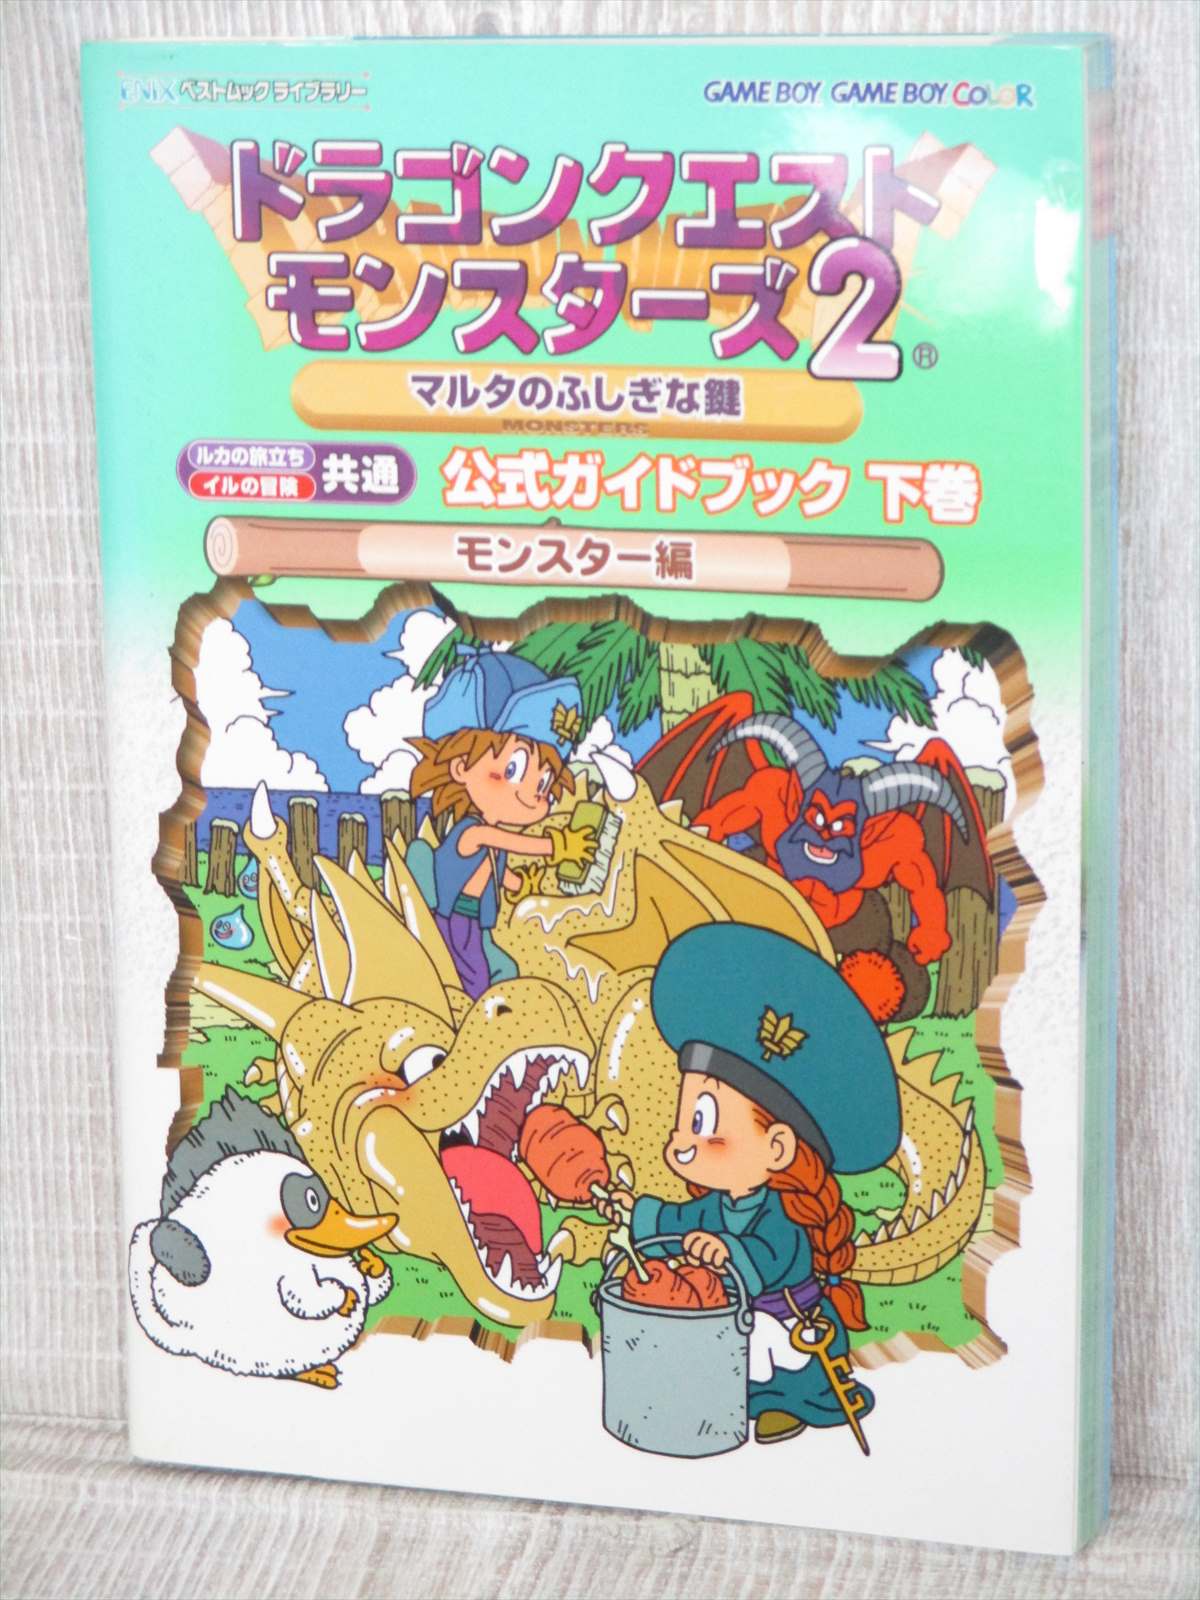 dragon-quest-monsters-2-official-guide-vol-2-gbc-book-ex00-ebay